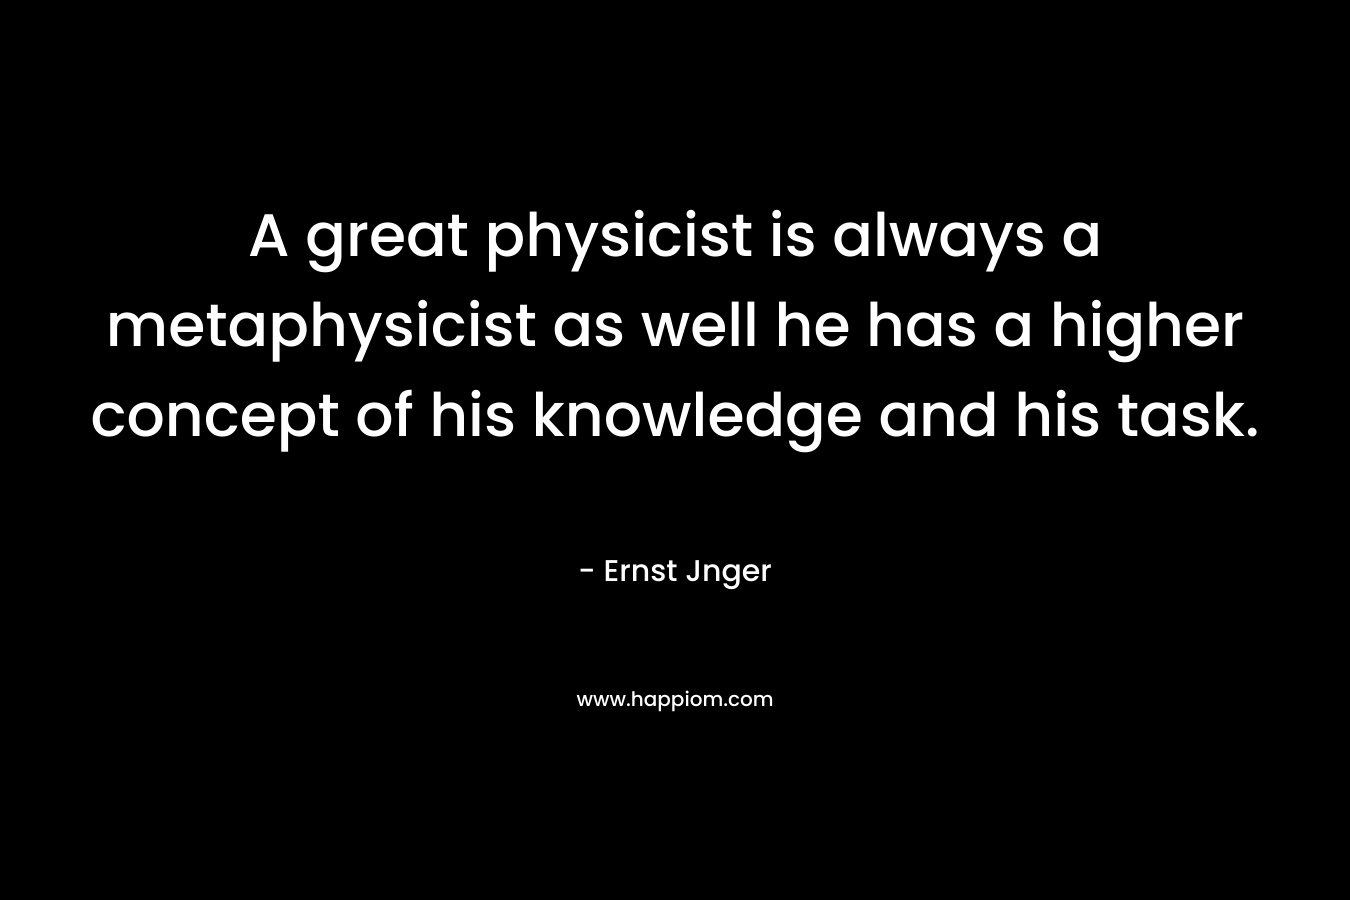 A great physicist is always a metaphysicist as well he has a higher concept of his knowledge and his task.